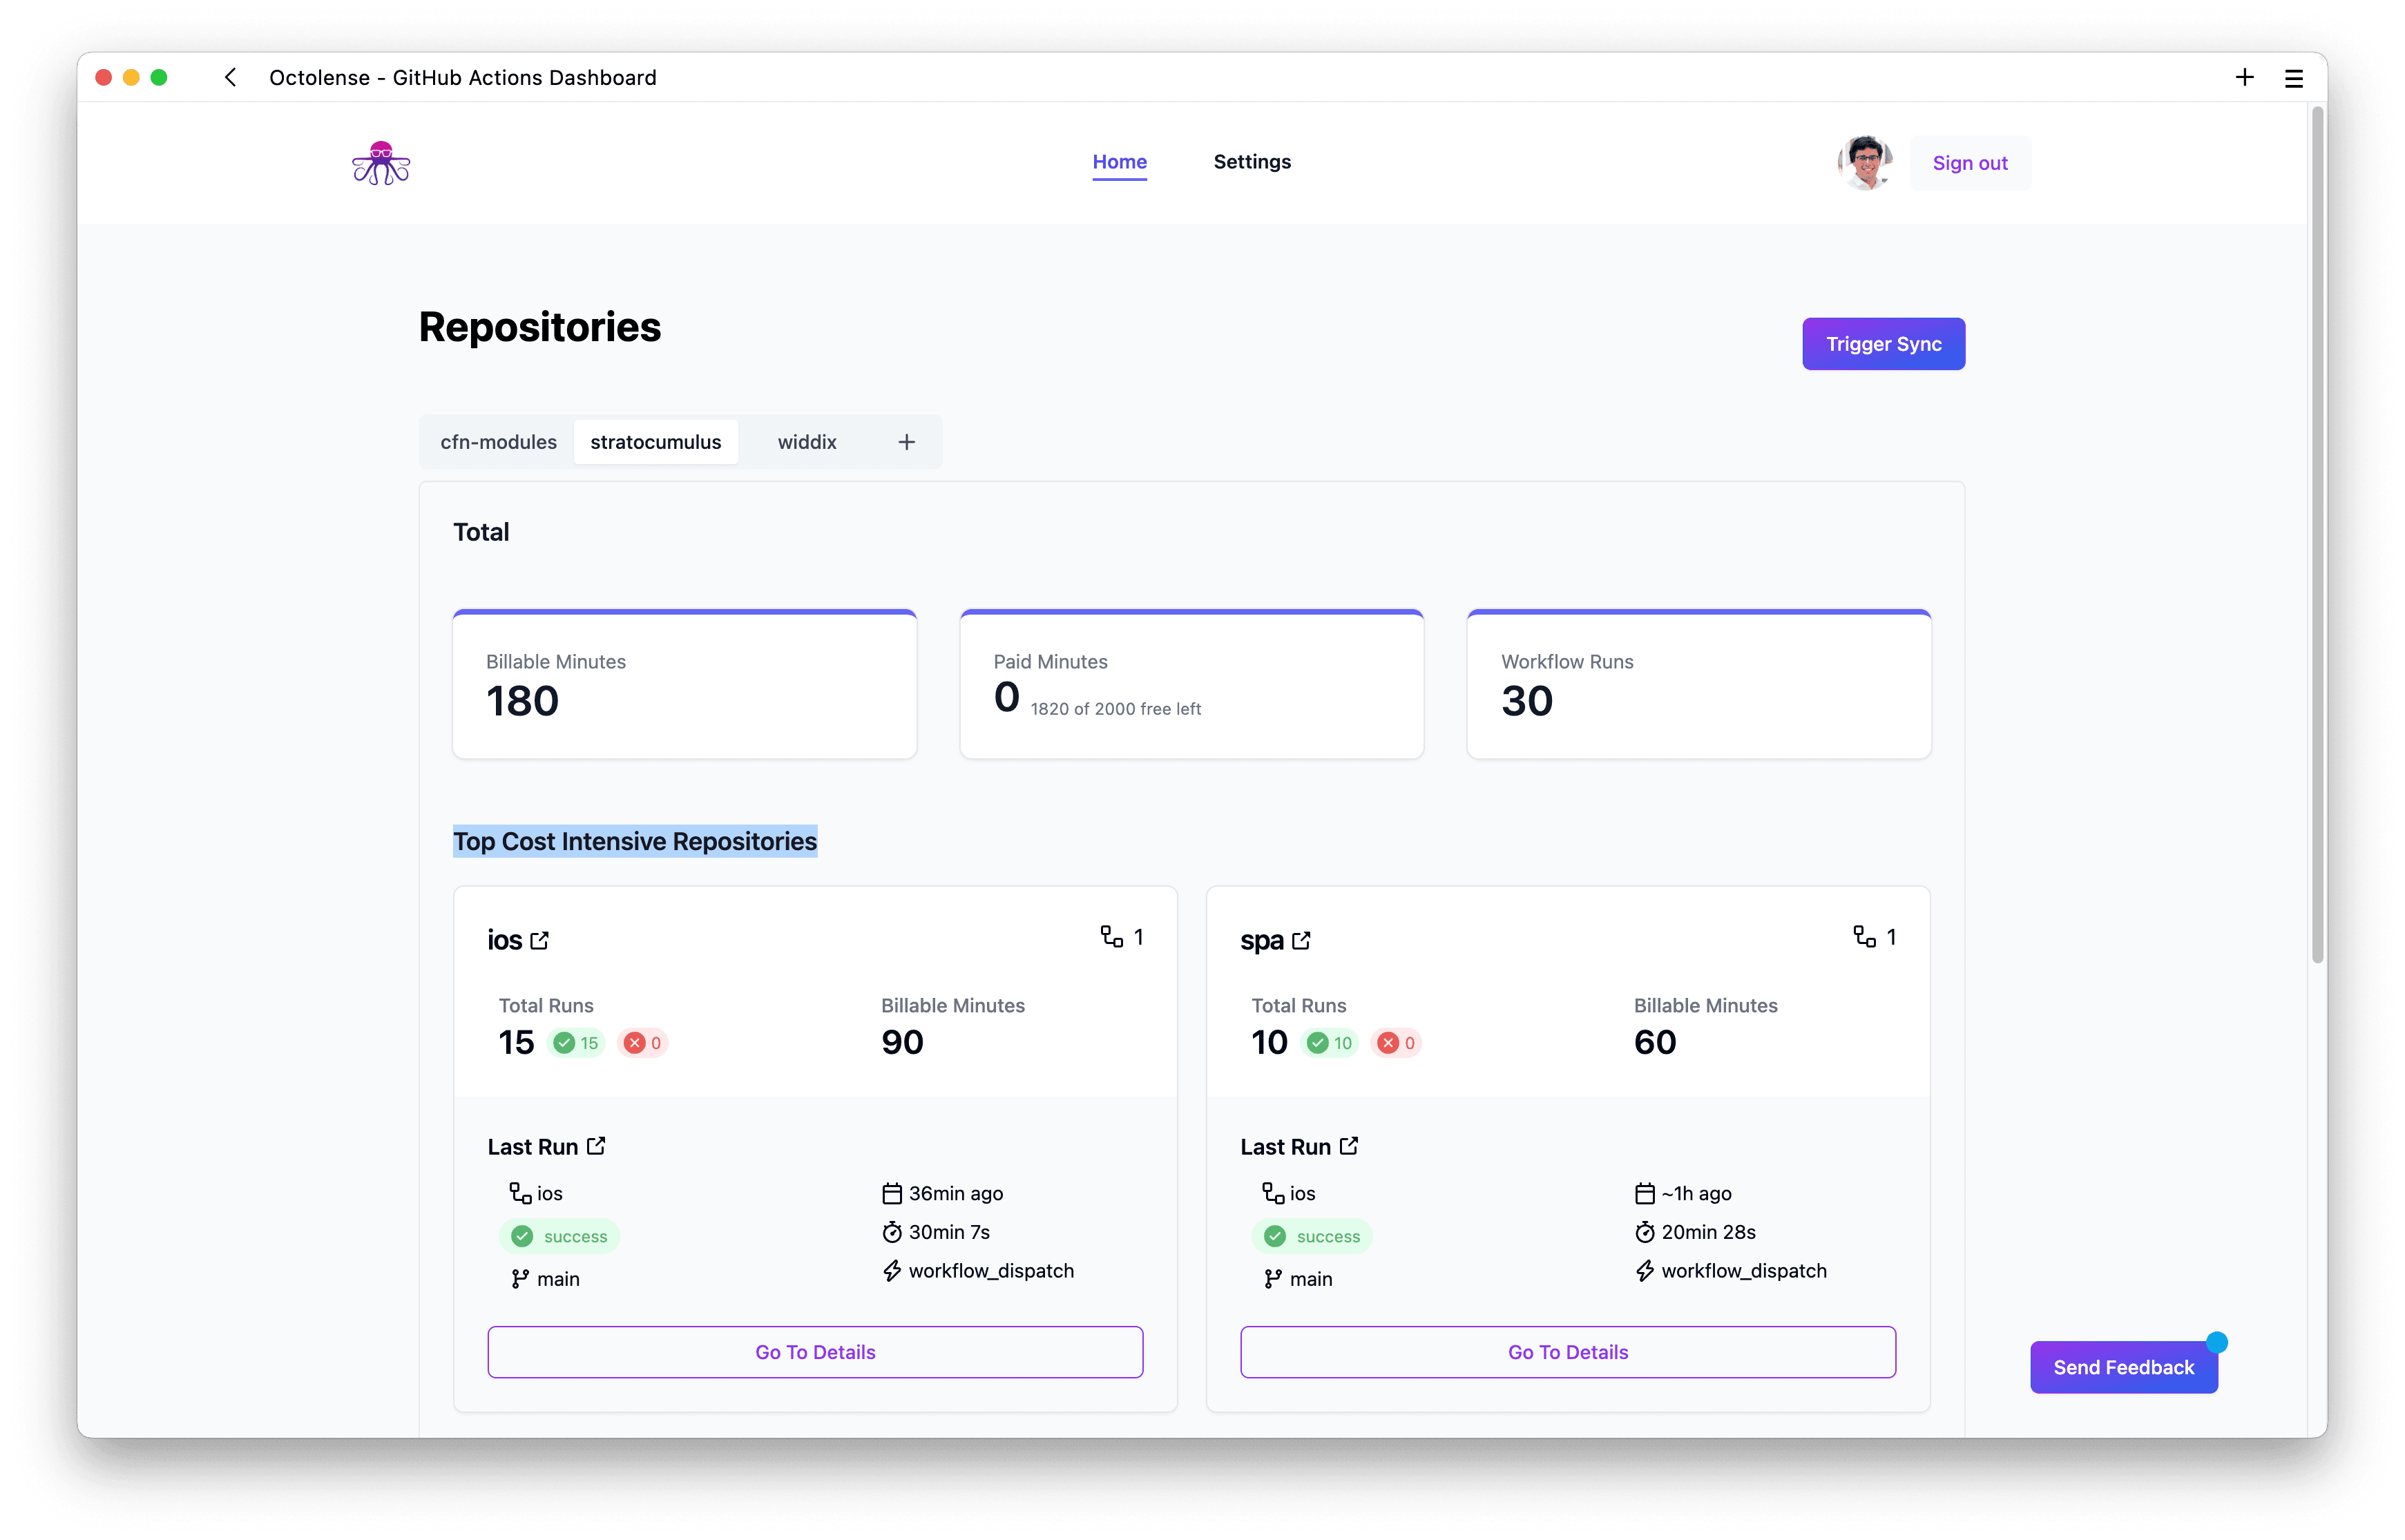 Octolense: The dashboard with insights into GitHub Actions usage